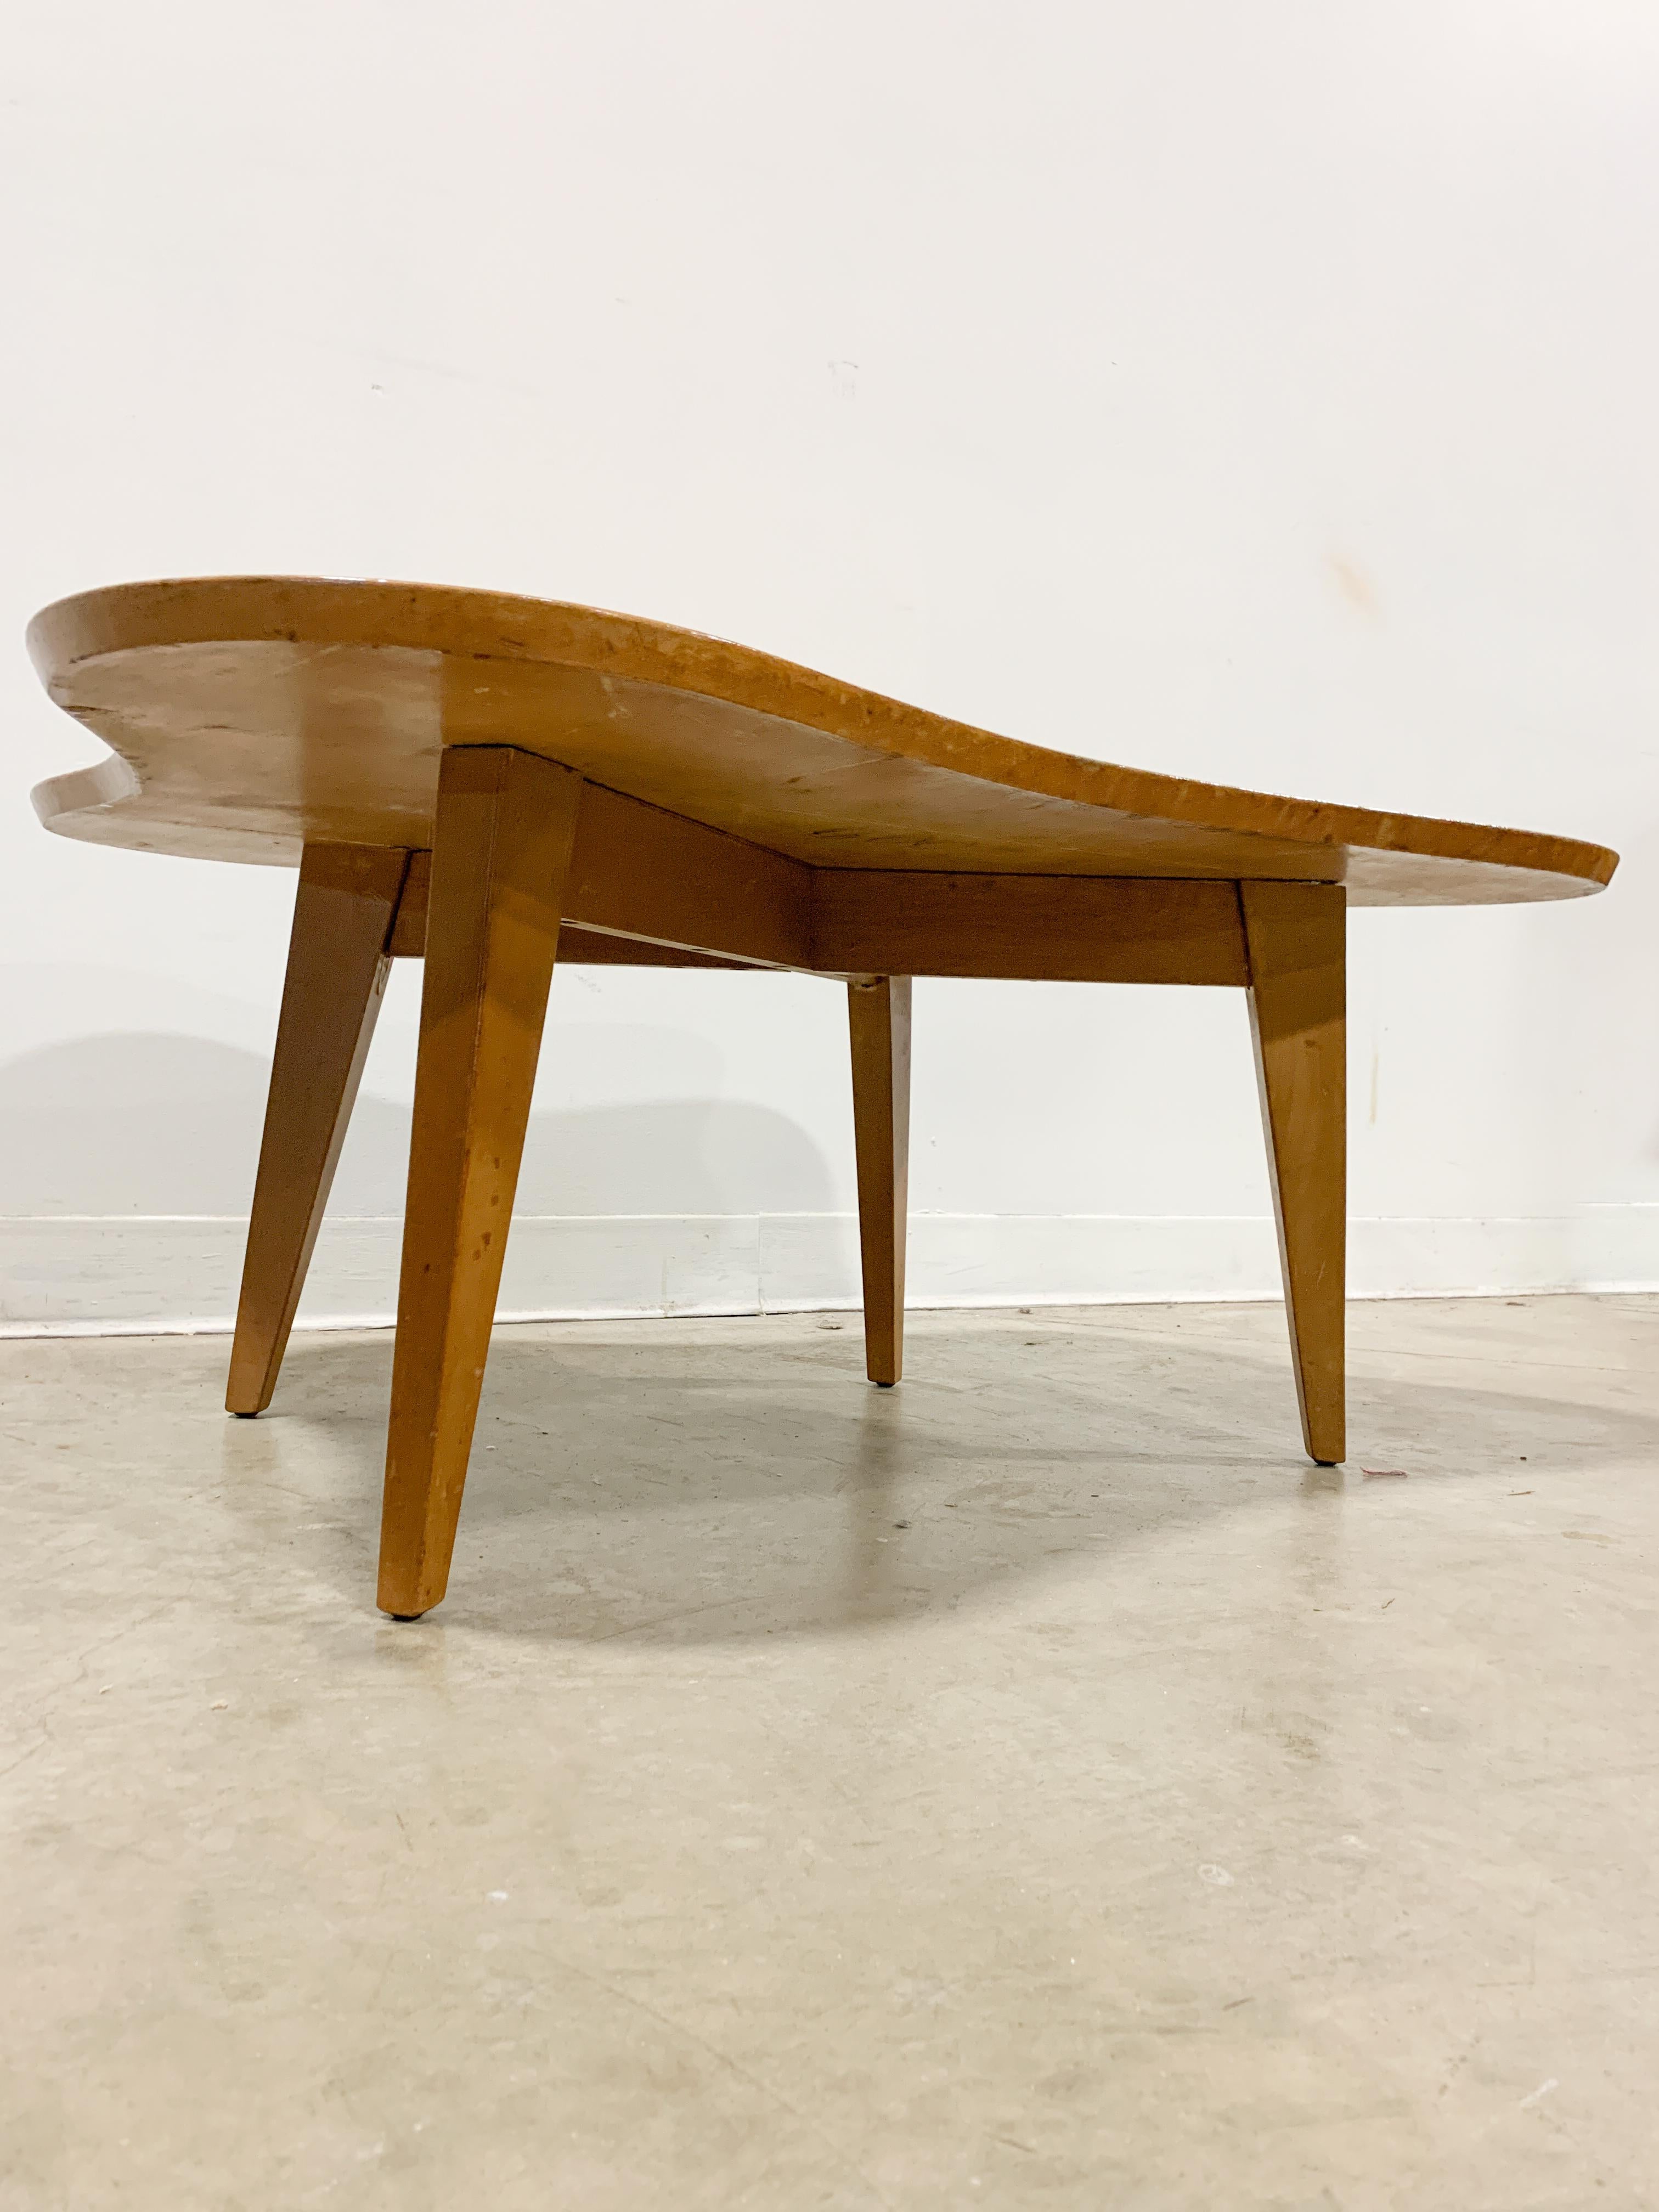 Very early design by Jens Risom for Knoll in the 1940s. Made of solid maple, this amorphic table top is a great example of organic modernism. Classic Risom leg details and a lovely natural woodgrain. Handwritten '600' underneath. Earliest crossbrace